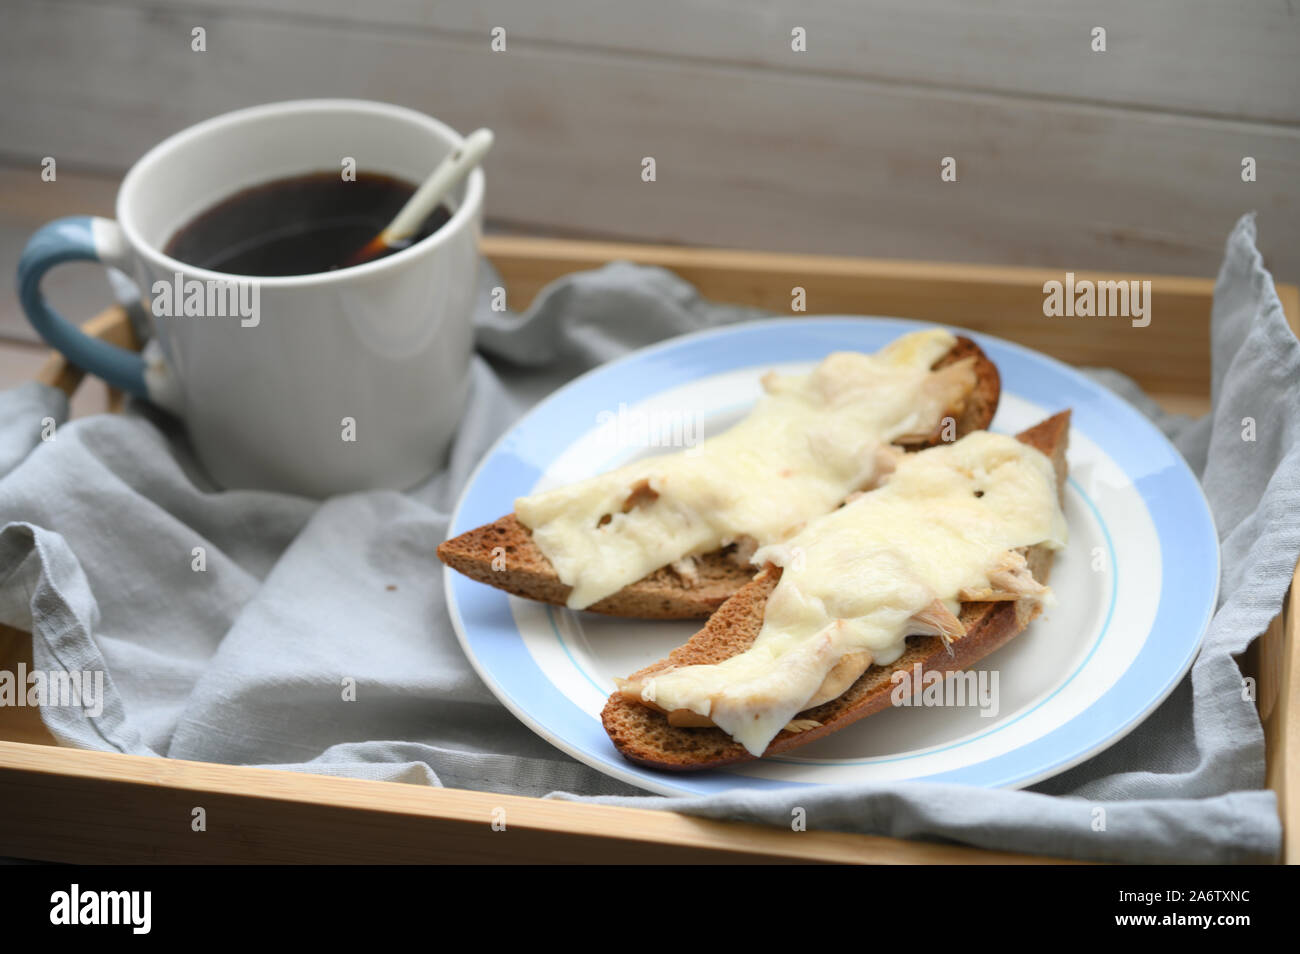 Rustic breakfast: two hot baguette sandwiches with chicken meat and cheese and a cup of black coffee on a wooden tray Stock Photo